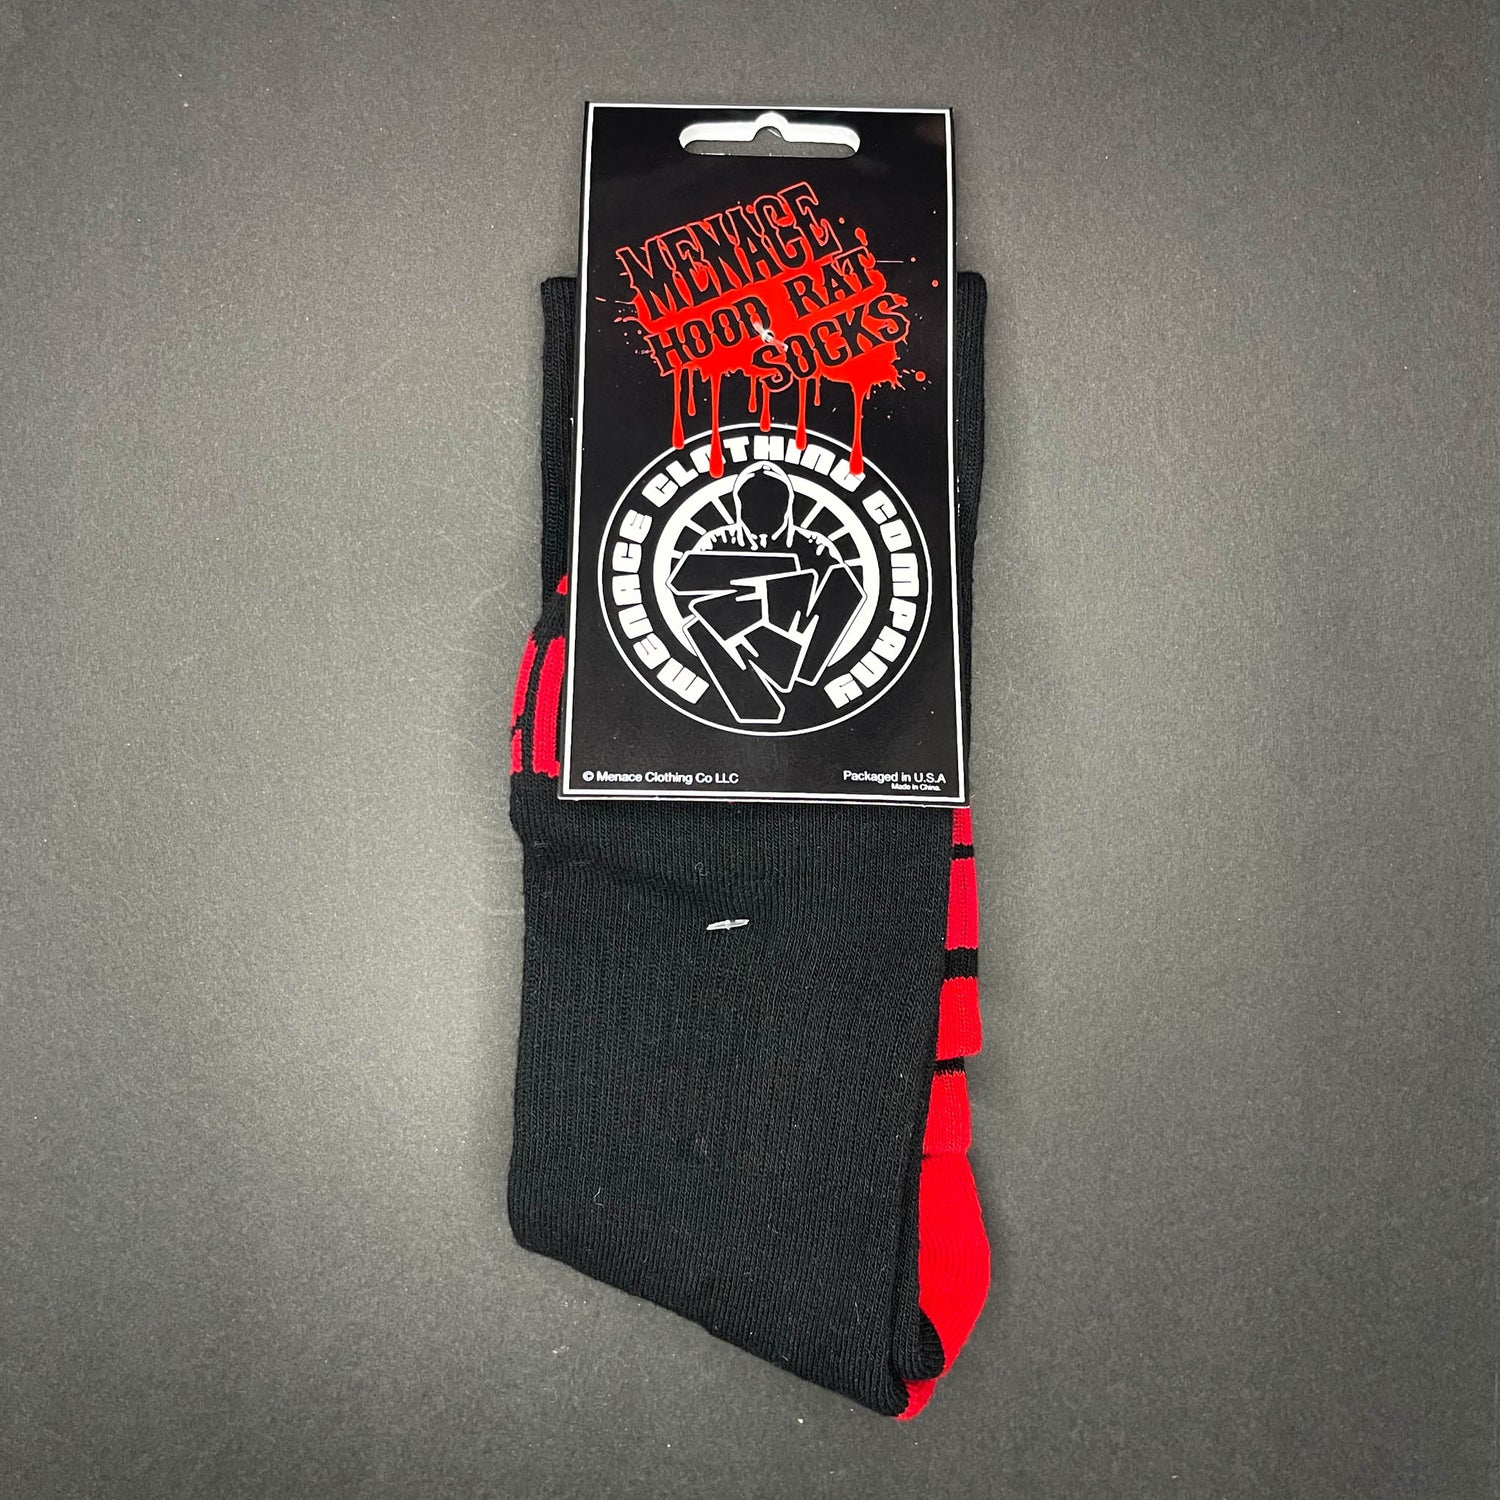 Menace Clothing red and black Hood Rat knee high socks with packaging. 